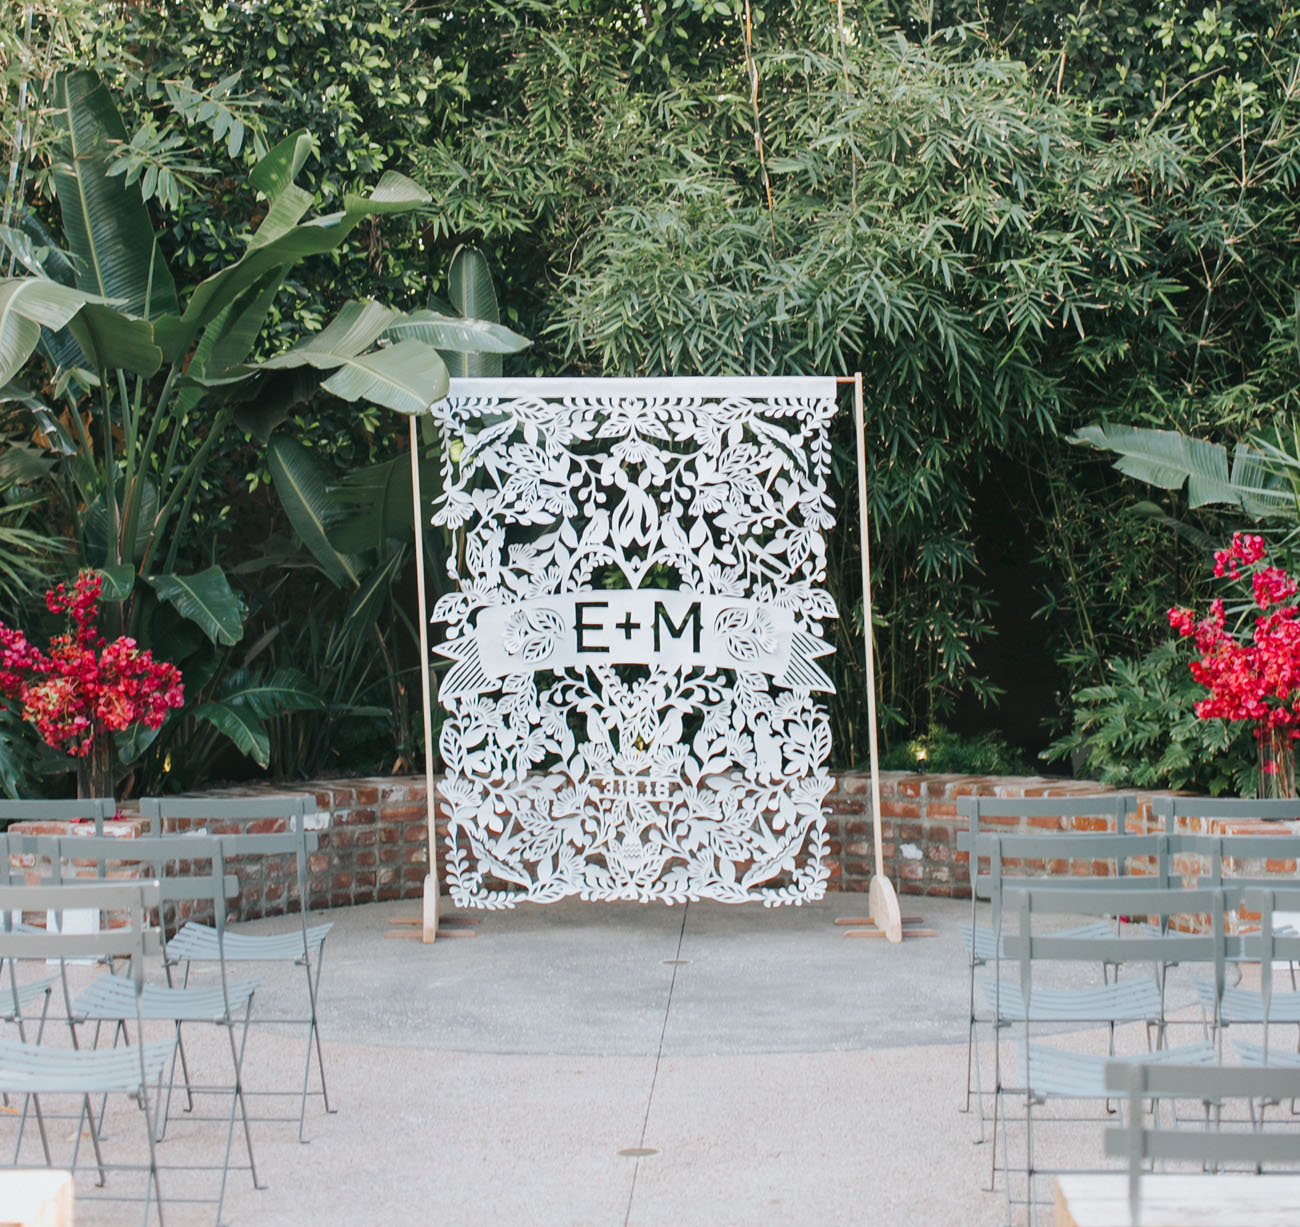 Wedding Stationery Inspiration: Photo Booth Backdrop / Oh So Beautiful Paper